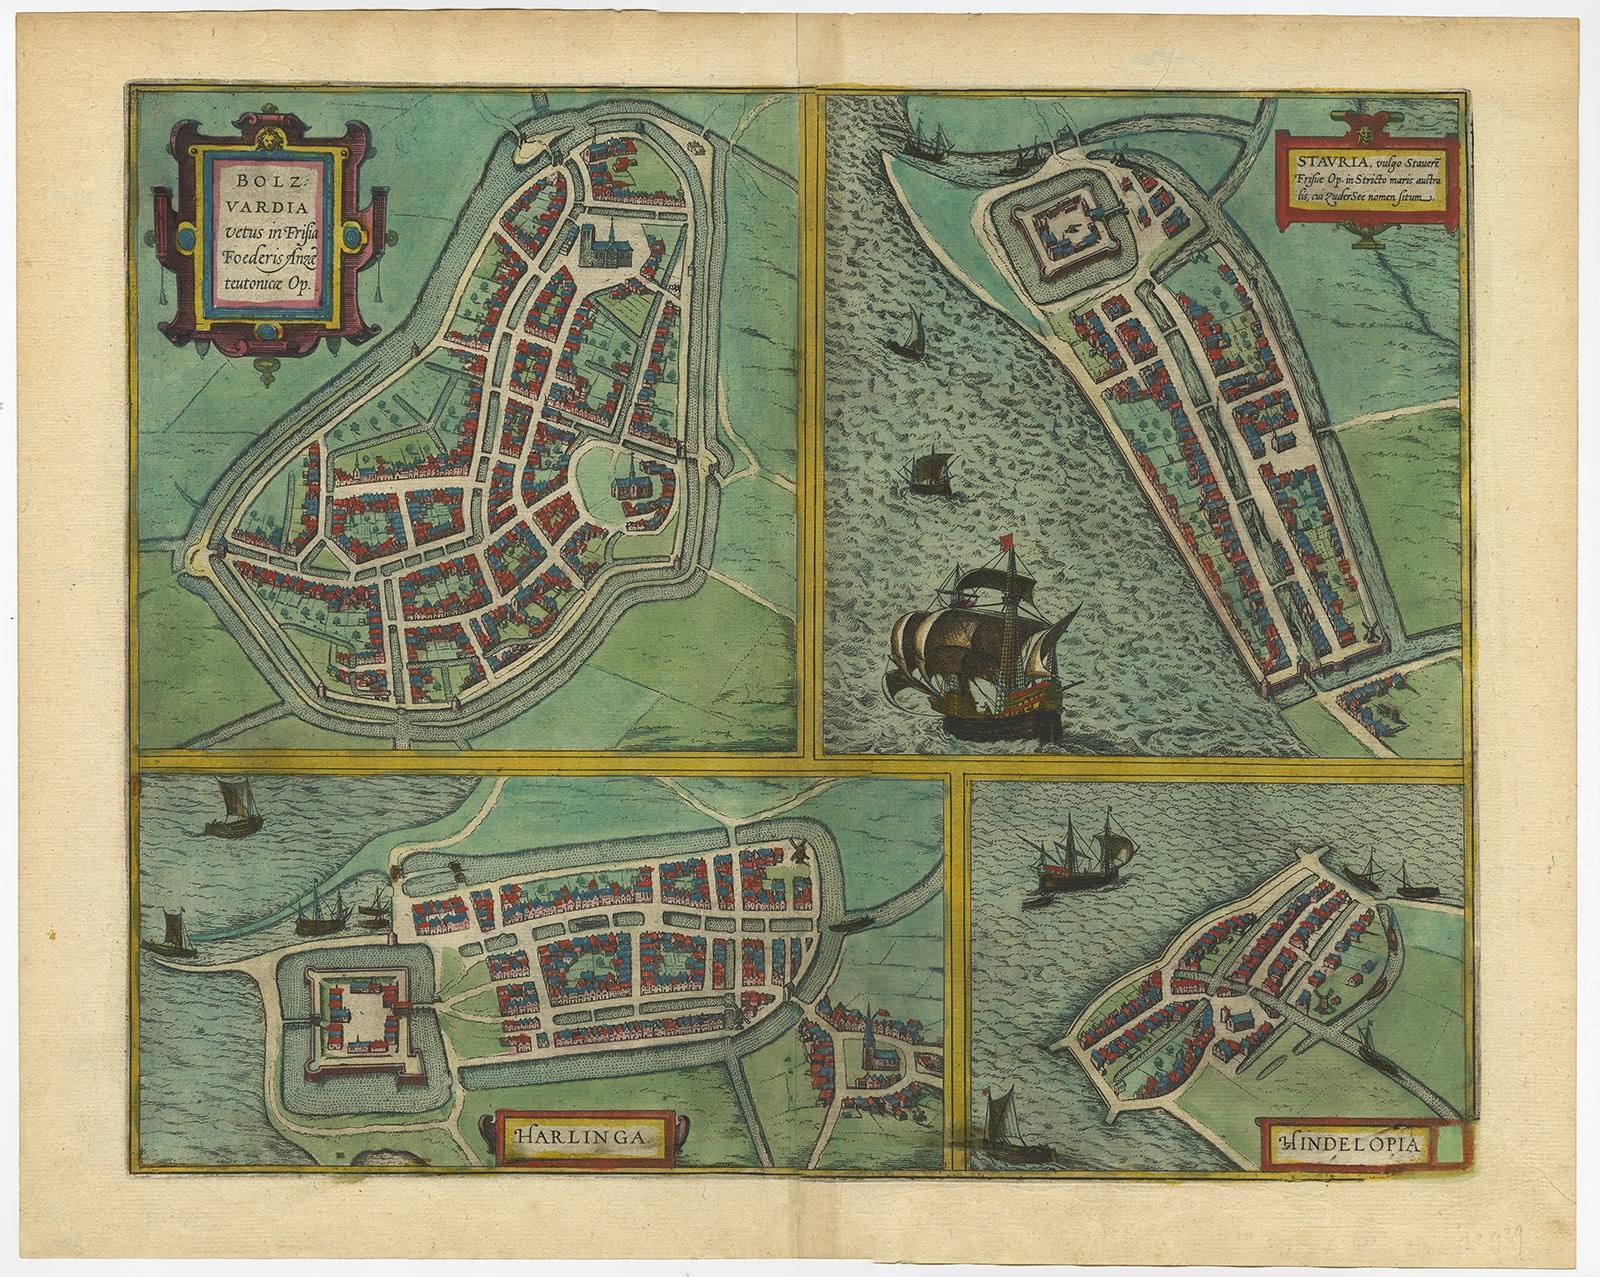 Antique map titled ‘Bolzvardia, Stavria, Harlinga, Hindelopia’. Four maps on one sheet. This map depicts the cities Bolsward, Stavoren, Harlingen and Hindeloopen (Friesland, The Netherlands). This map originates from ‘Urbium praecipuarum totius